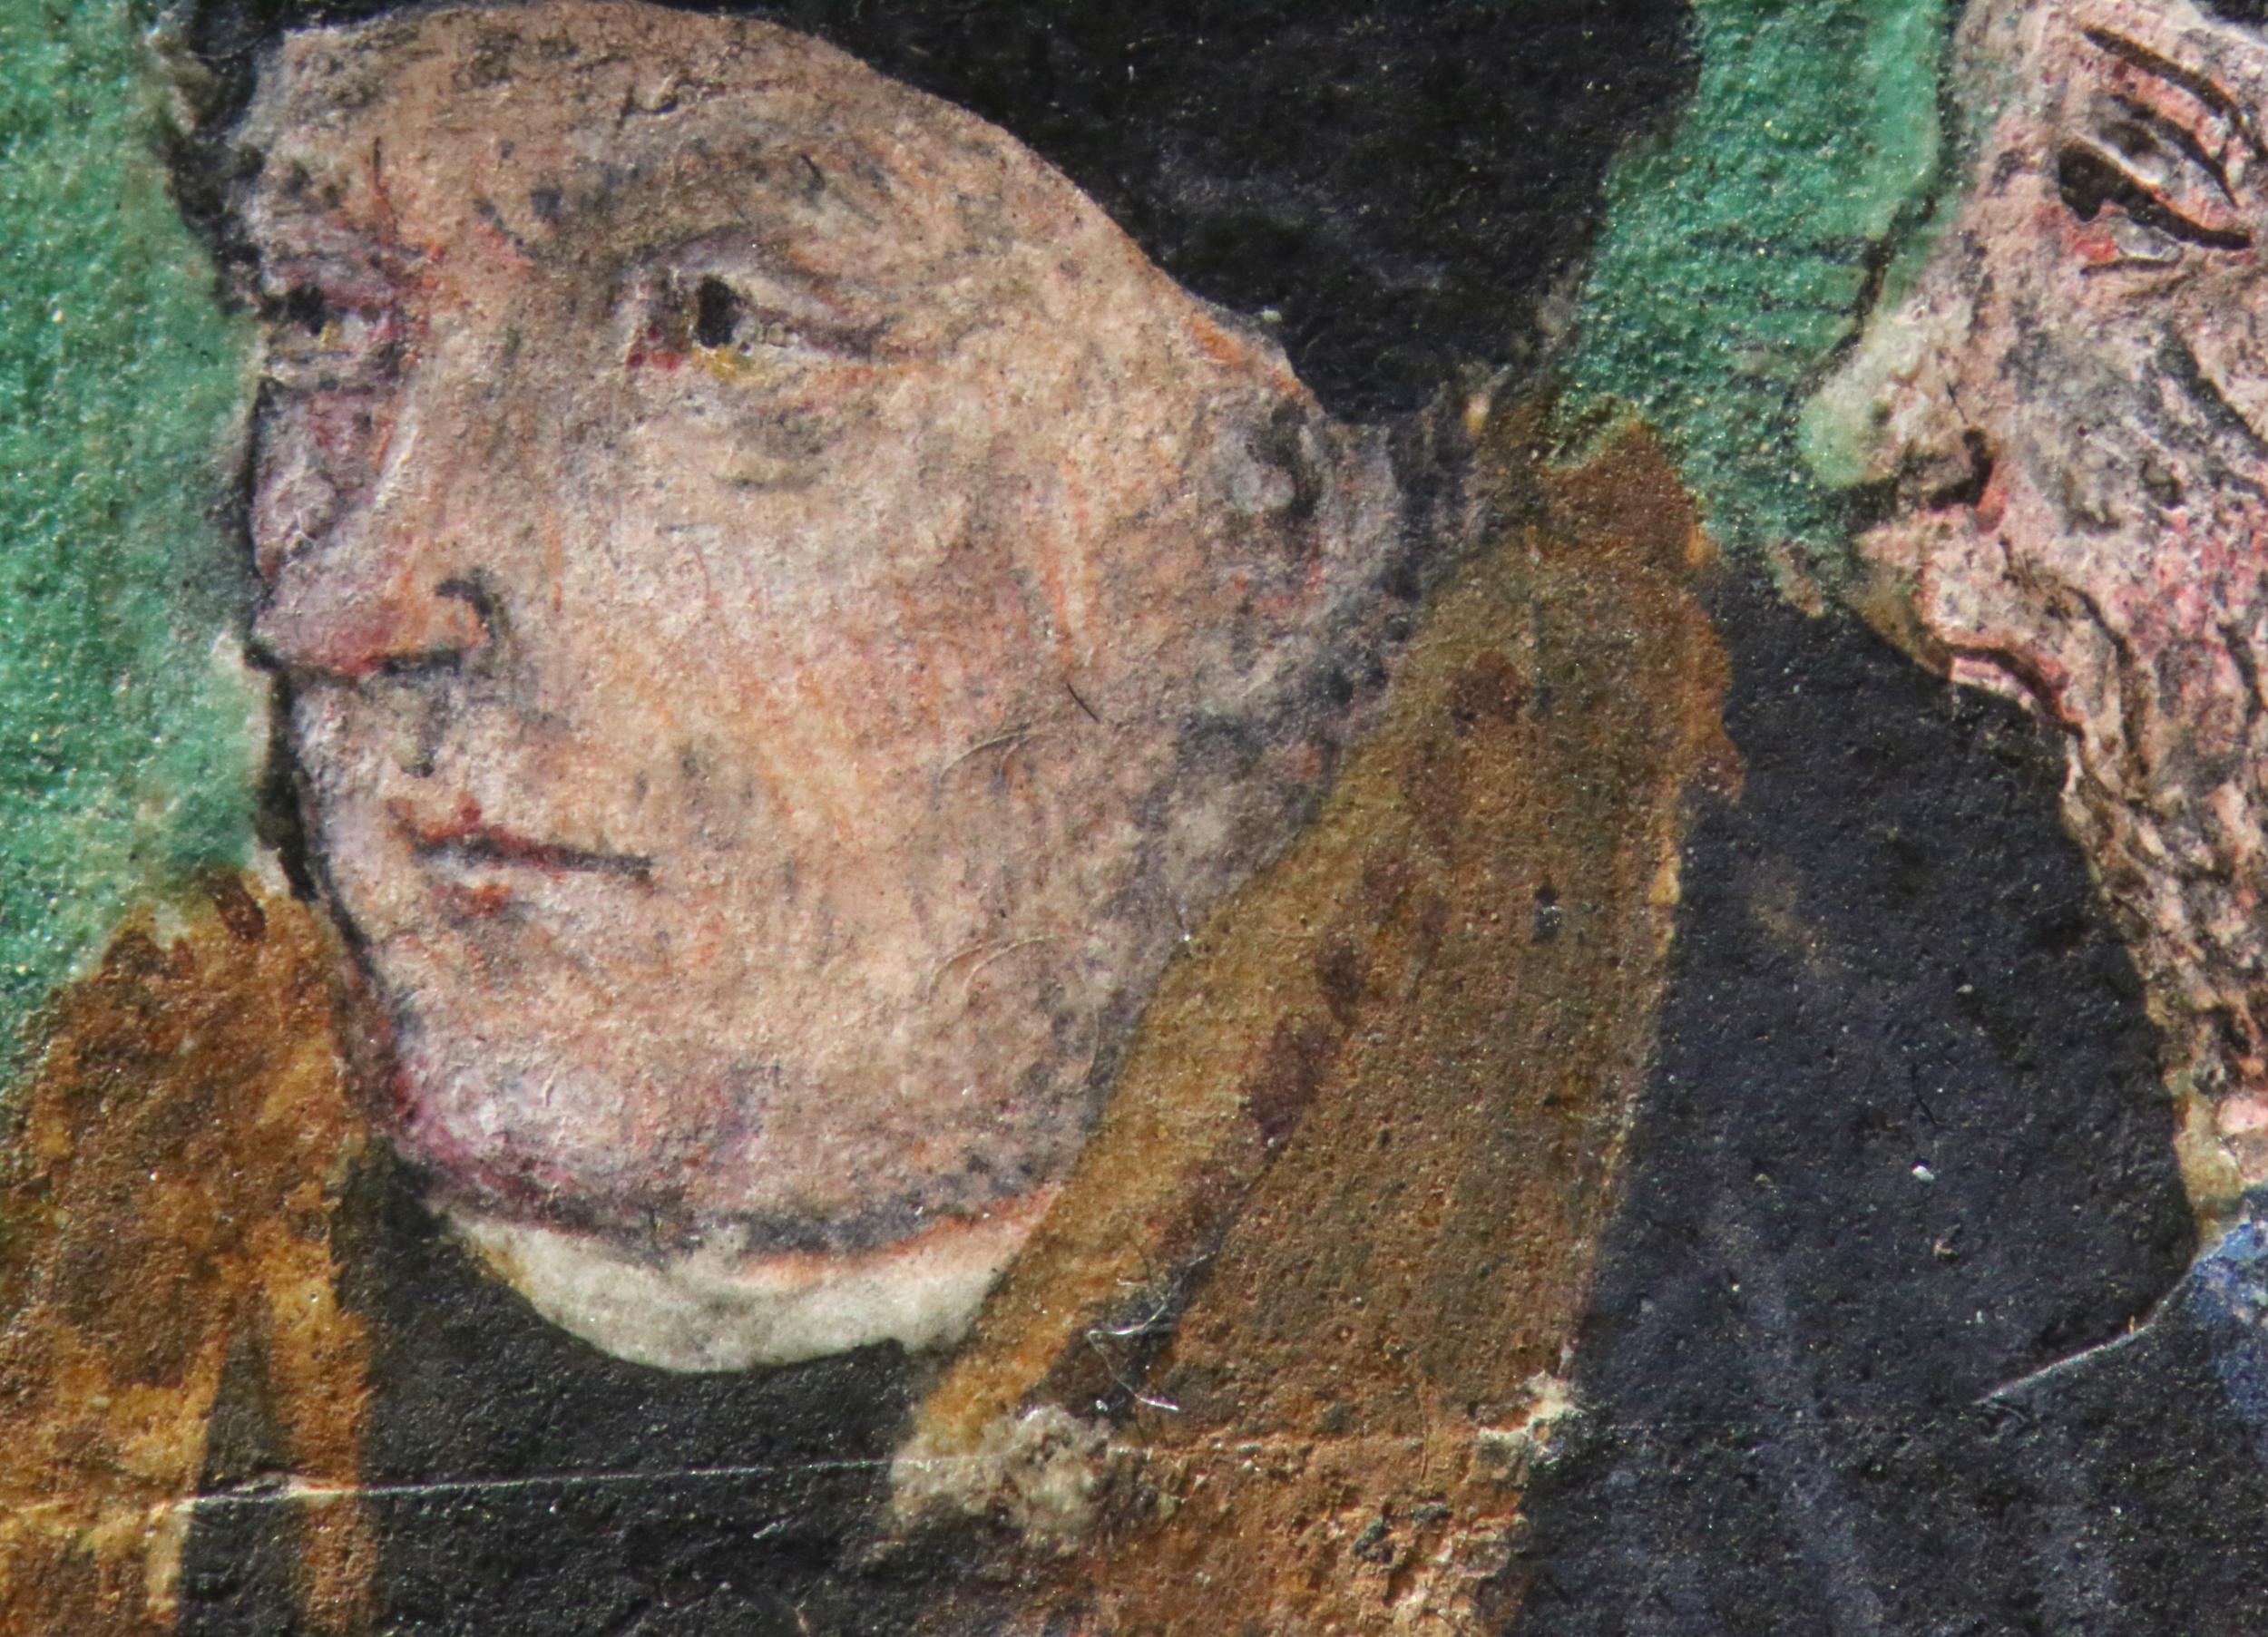 The edges of Cromwell’s portrait are barely noticeable but reveal it was painted separately and glued on to the vellum page